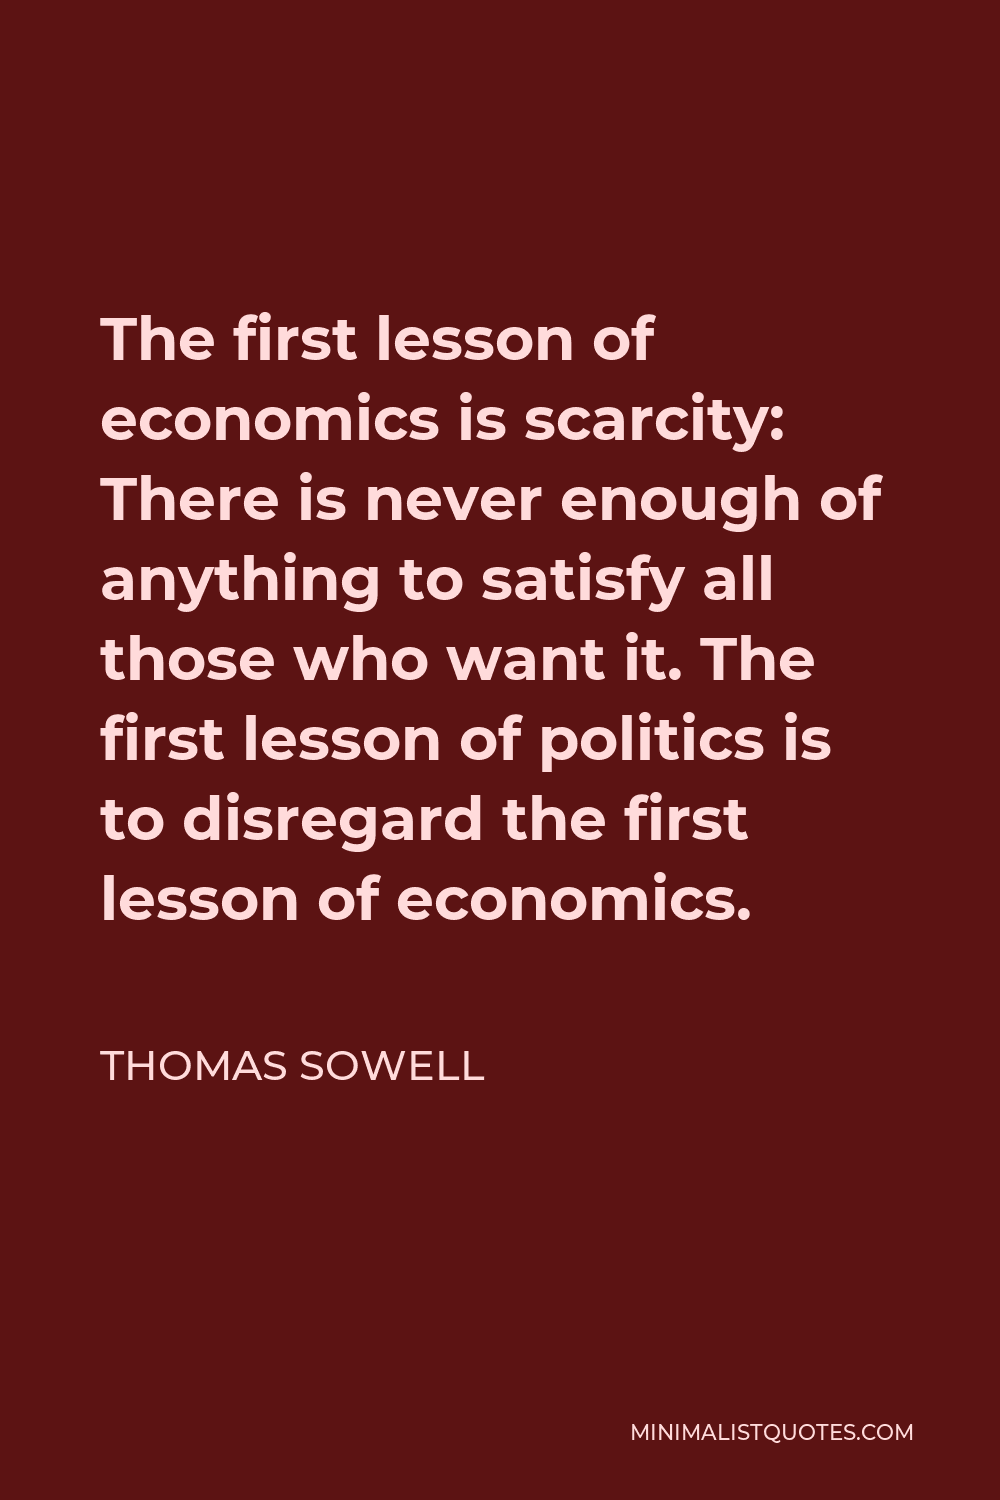 Thomas Sowell Quote - The first lesson of economics is scarcity: There is never enough of anything to satisfy all those who want it. The first lesson of politics is to disregard the first lesson of economics.